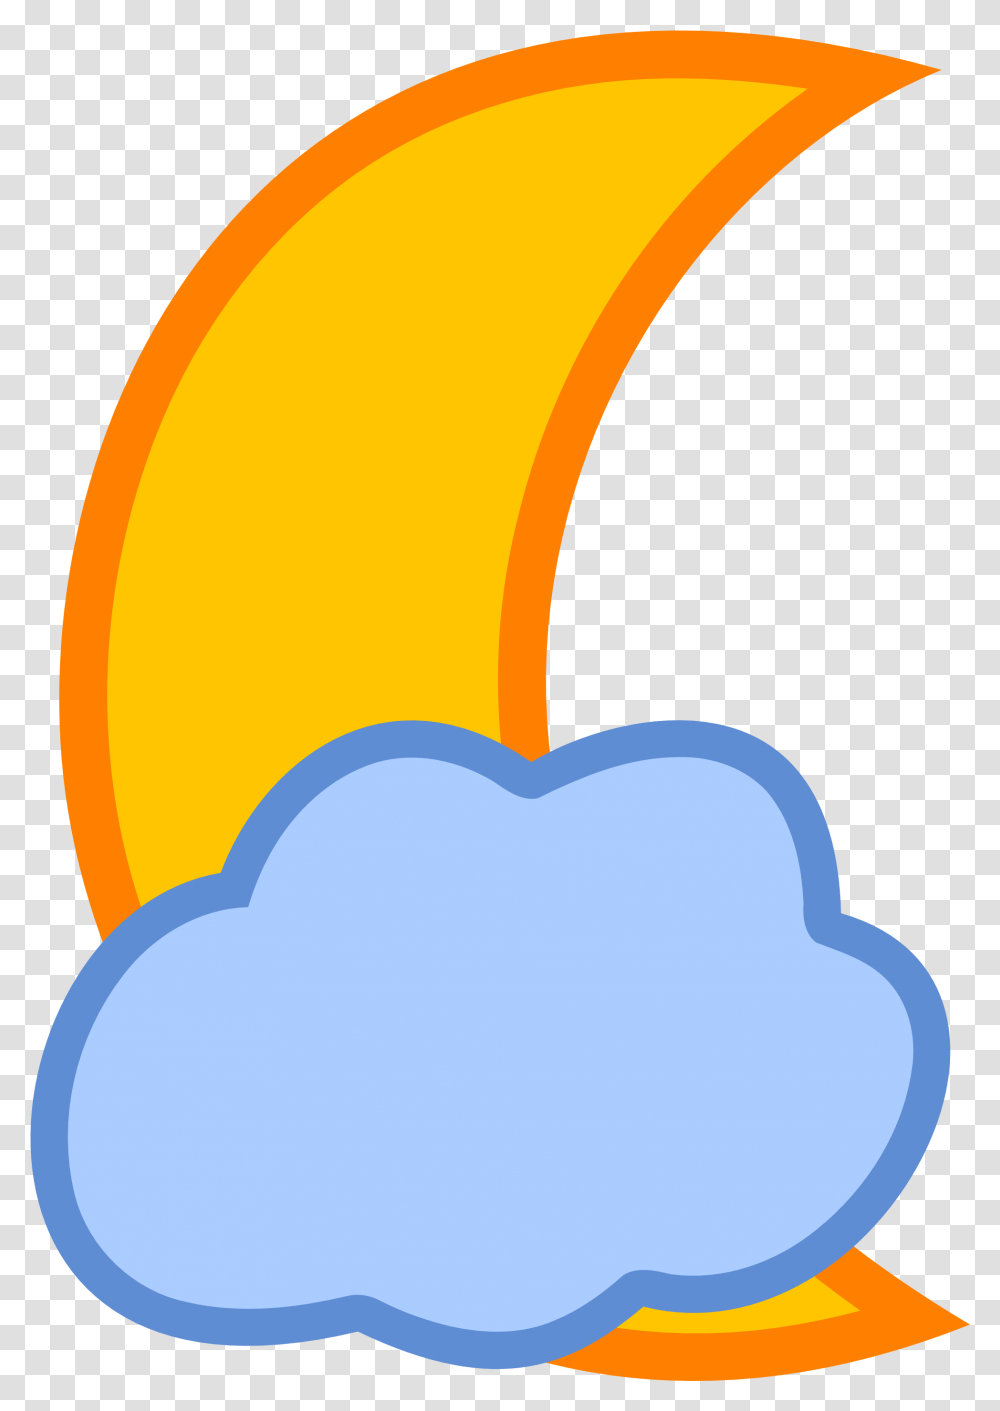 Cloud Outline Moon And Cloud Clipart Download Clip Art Moon With Clouds, Food, Plant, Heart, Fruit Transparent Png